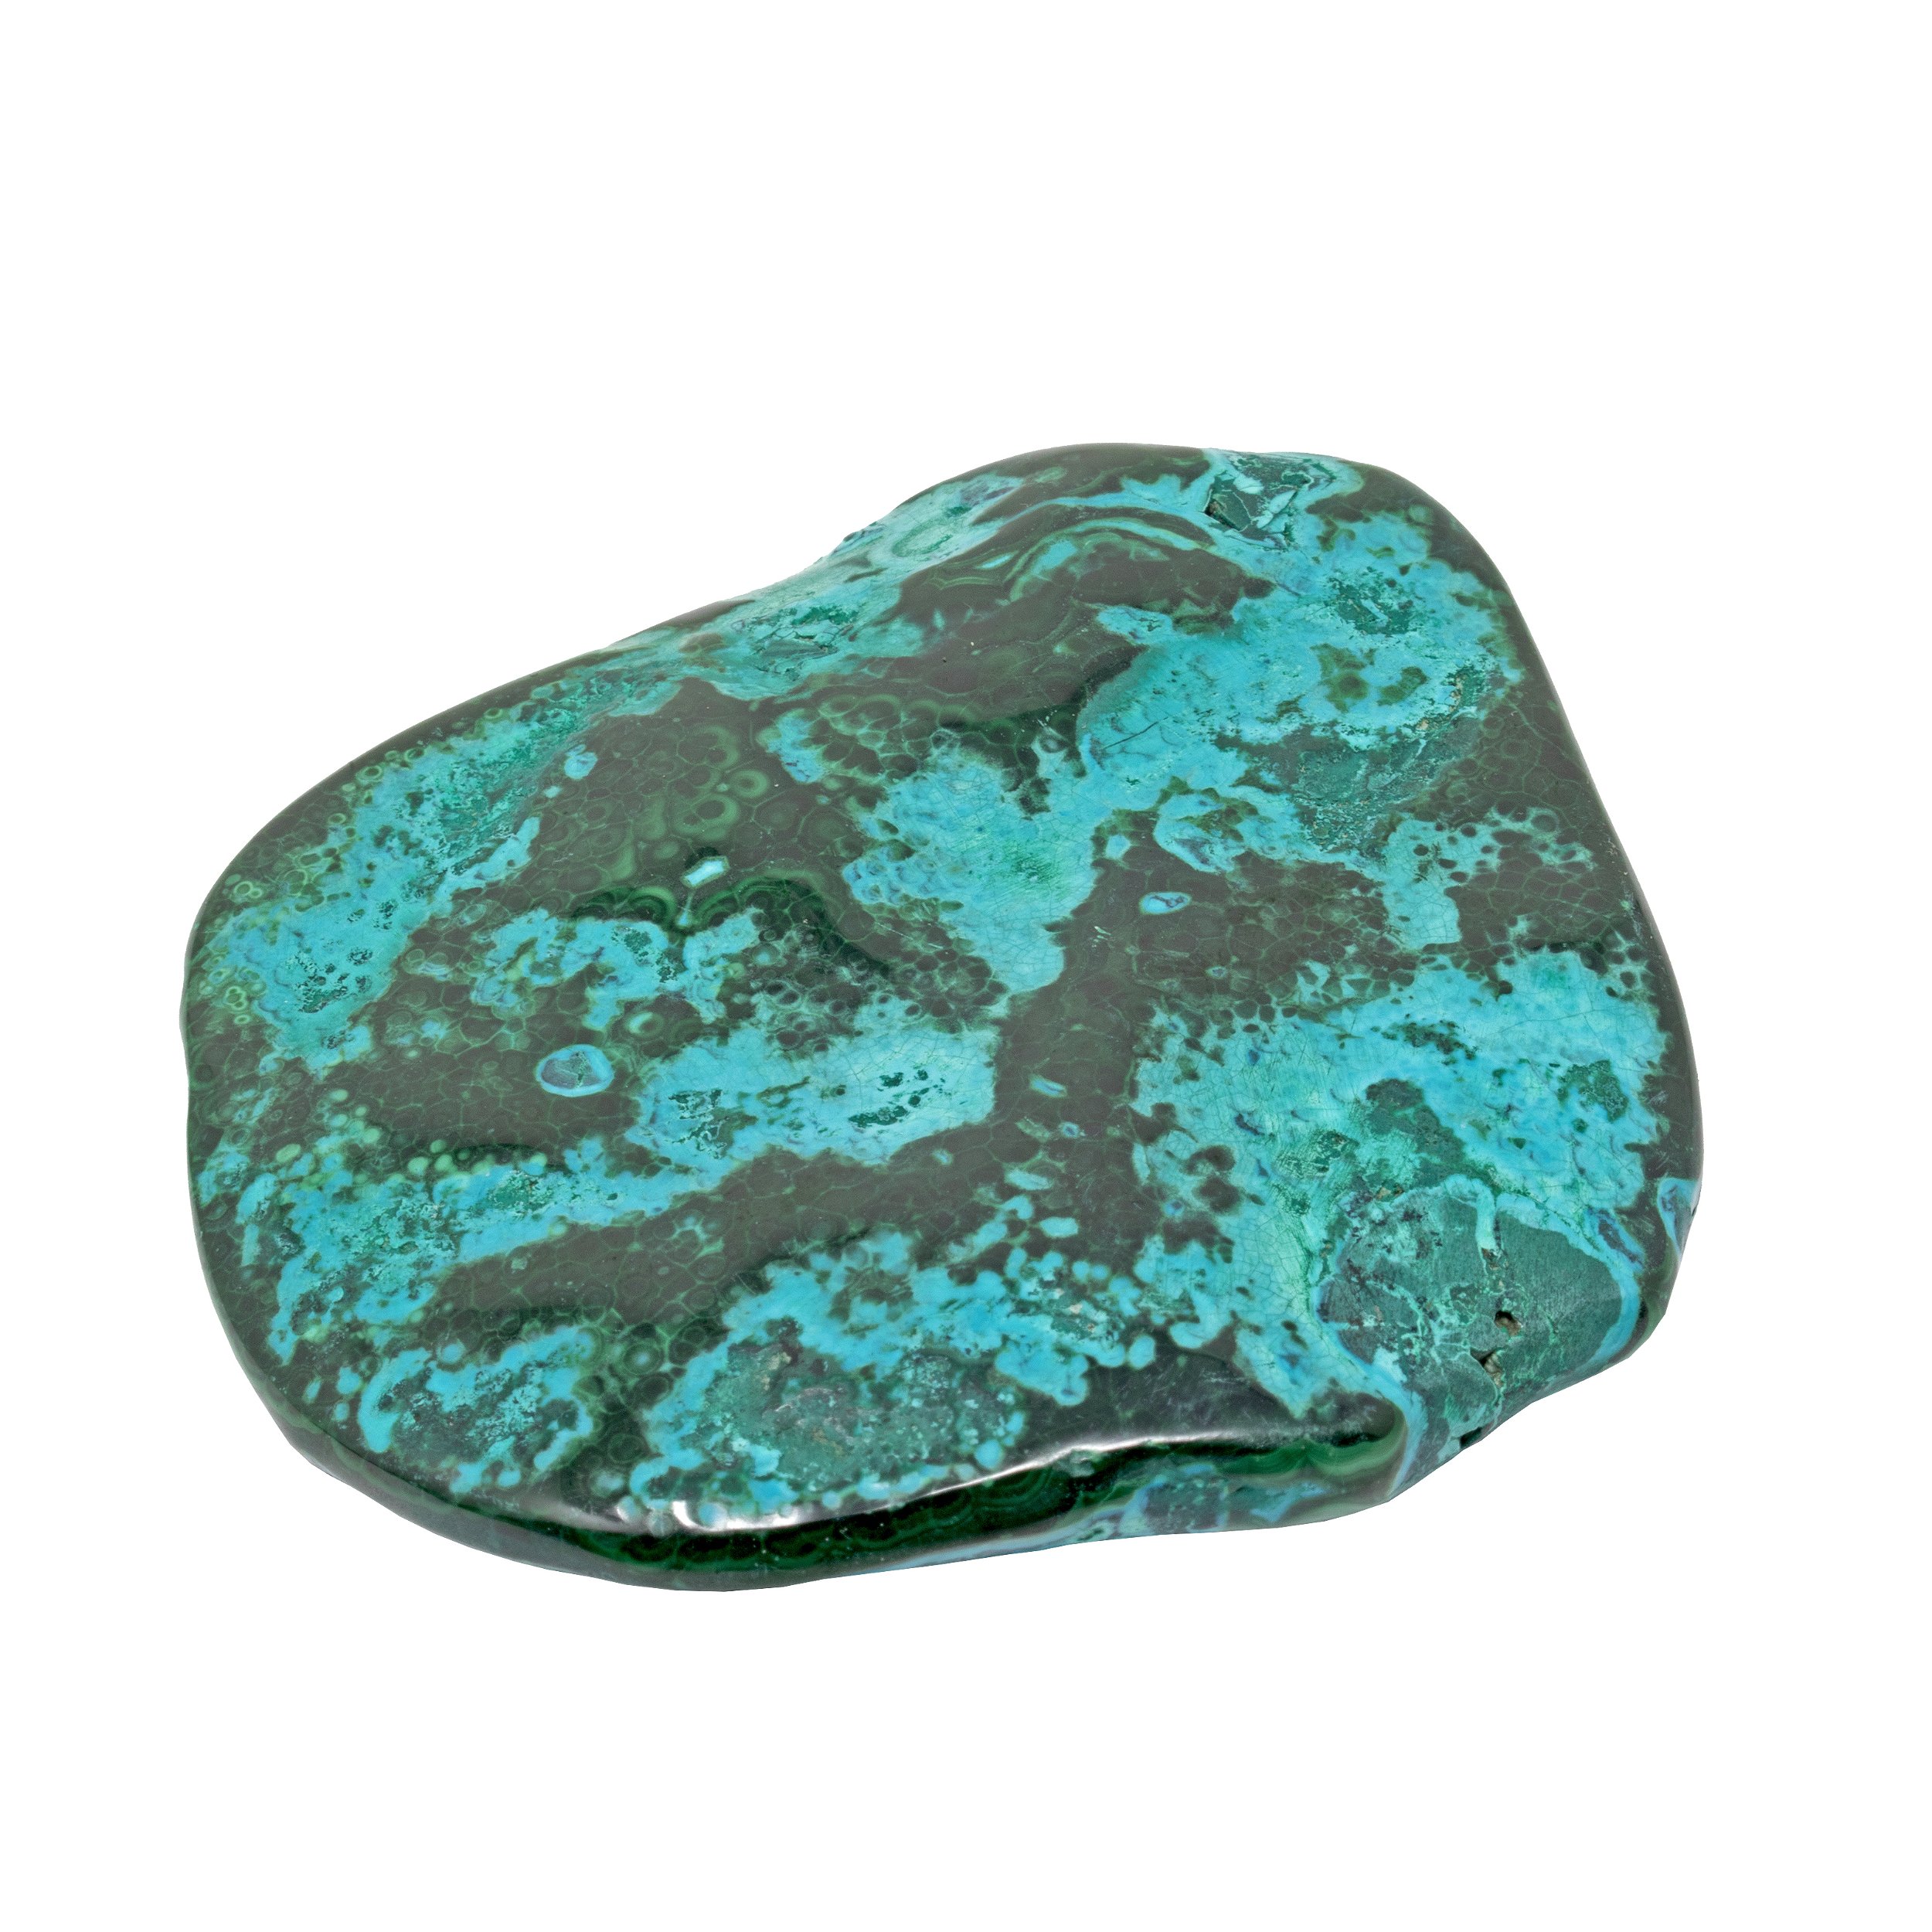 Chrysocolla Malachite Freeform Polished - Islands Of Green Intertwined With Blue "Waters"